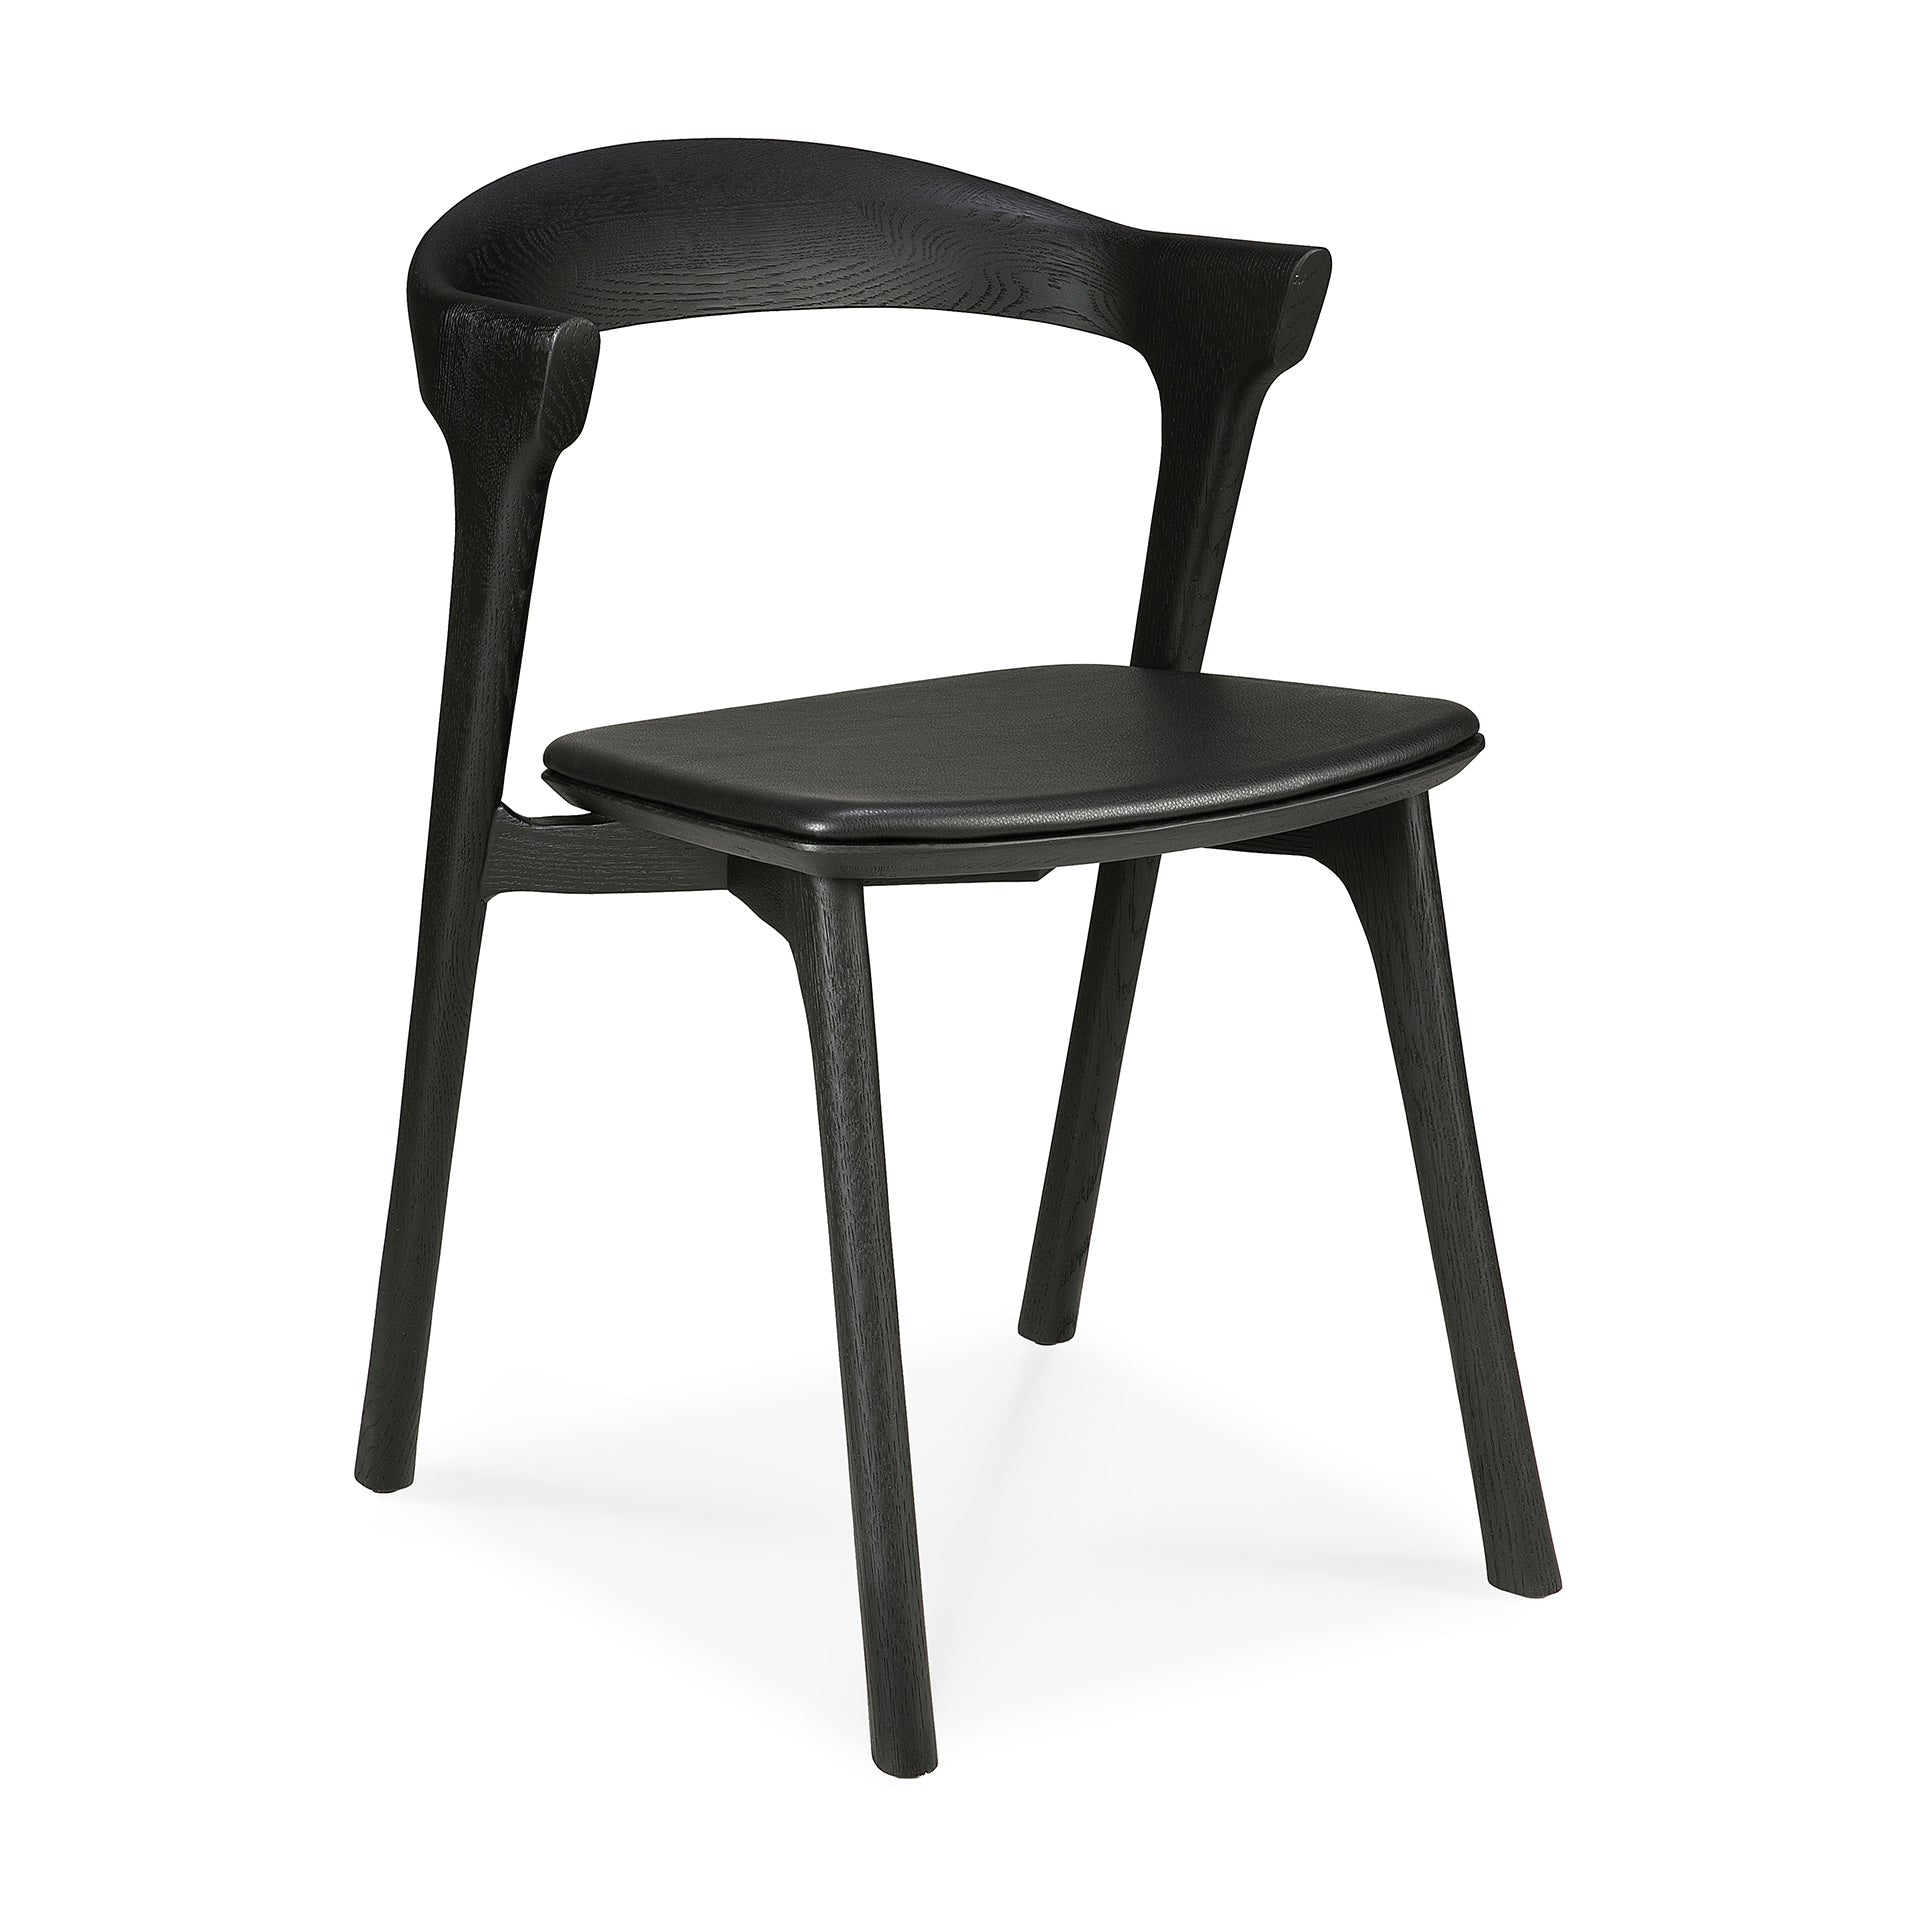 Ethnicraft Oak Bok Black Leather Dining Chair is available from Make Your House A Home, Bendigo, Victoria, Australia